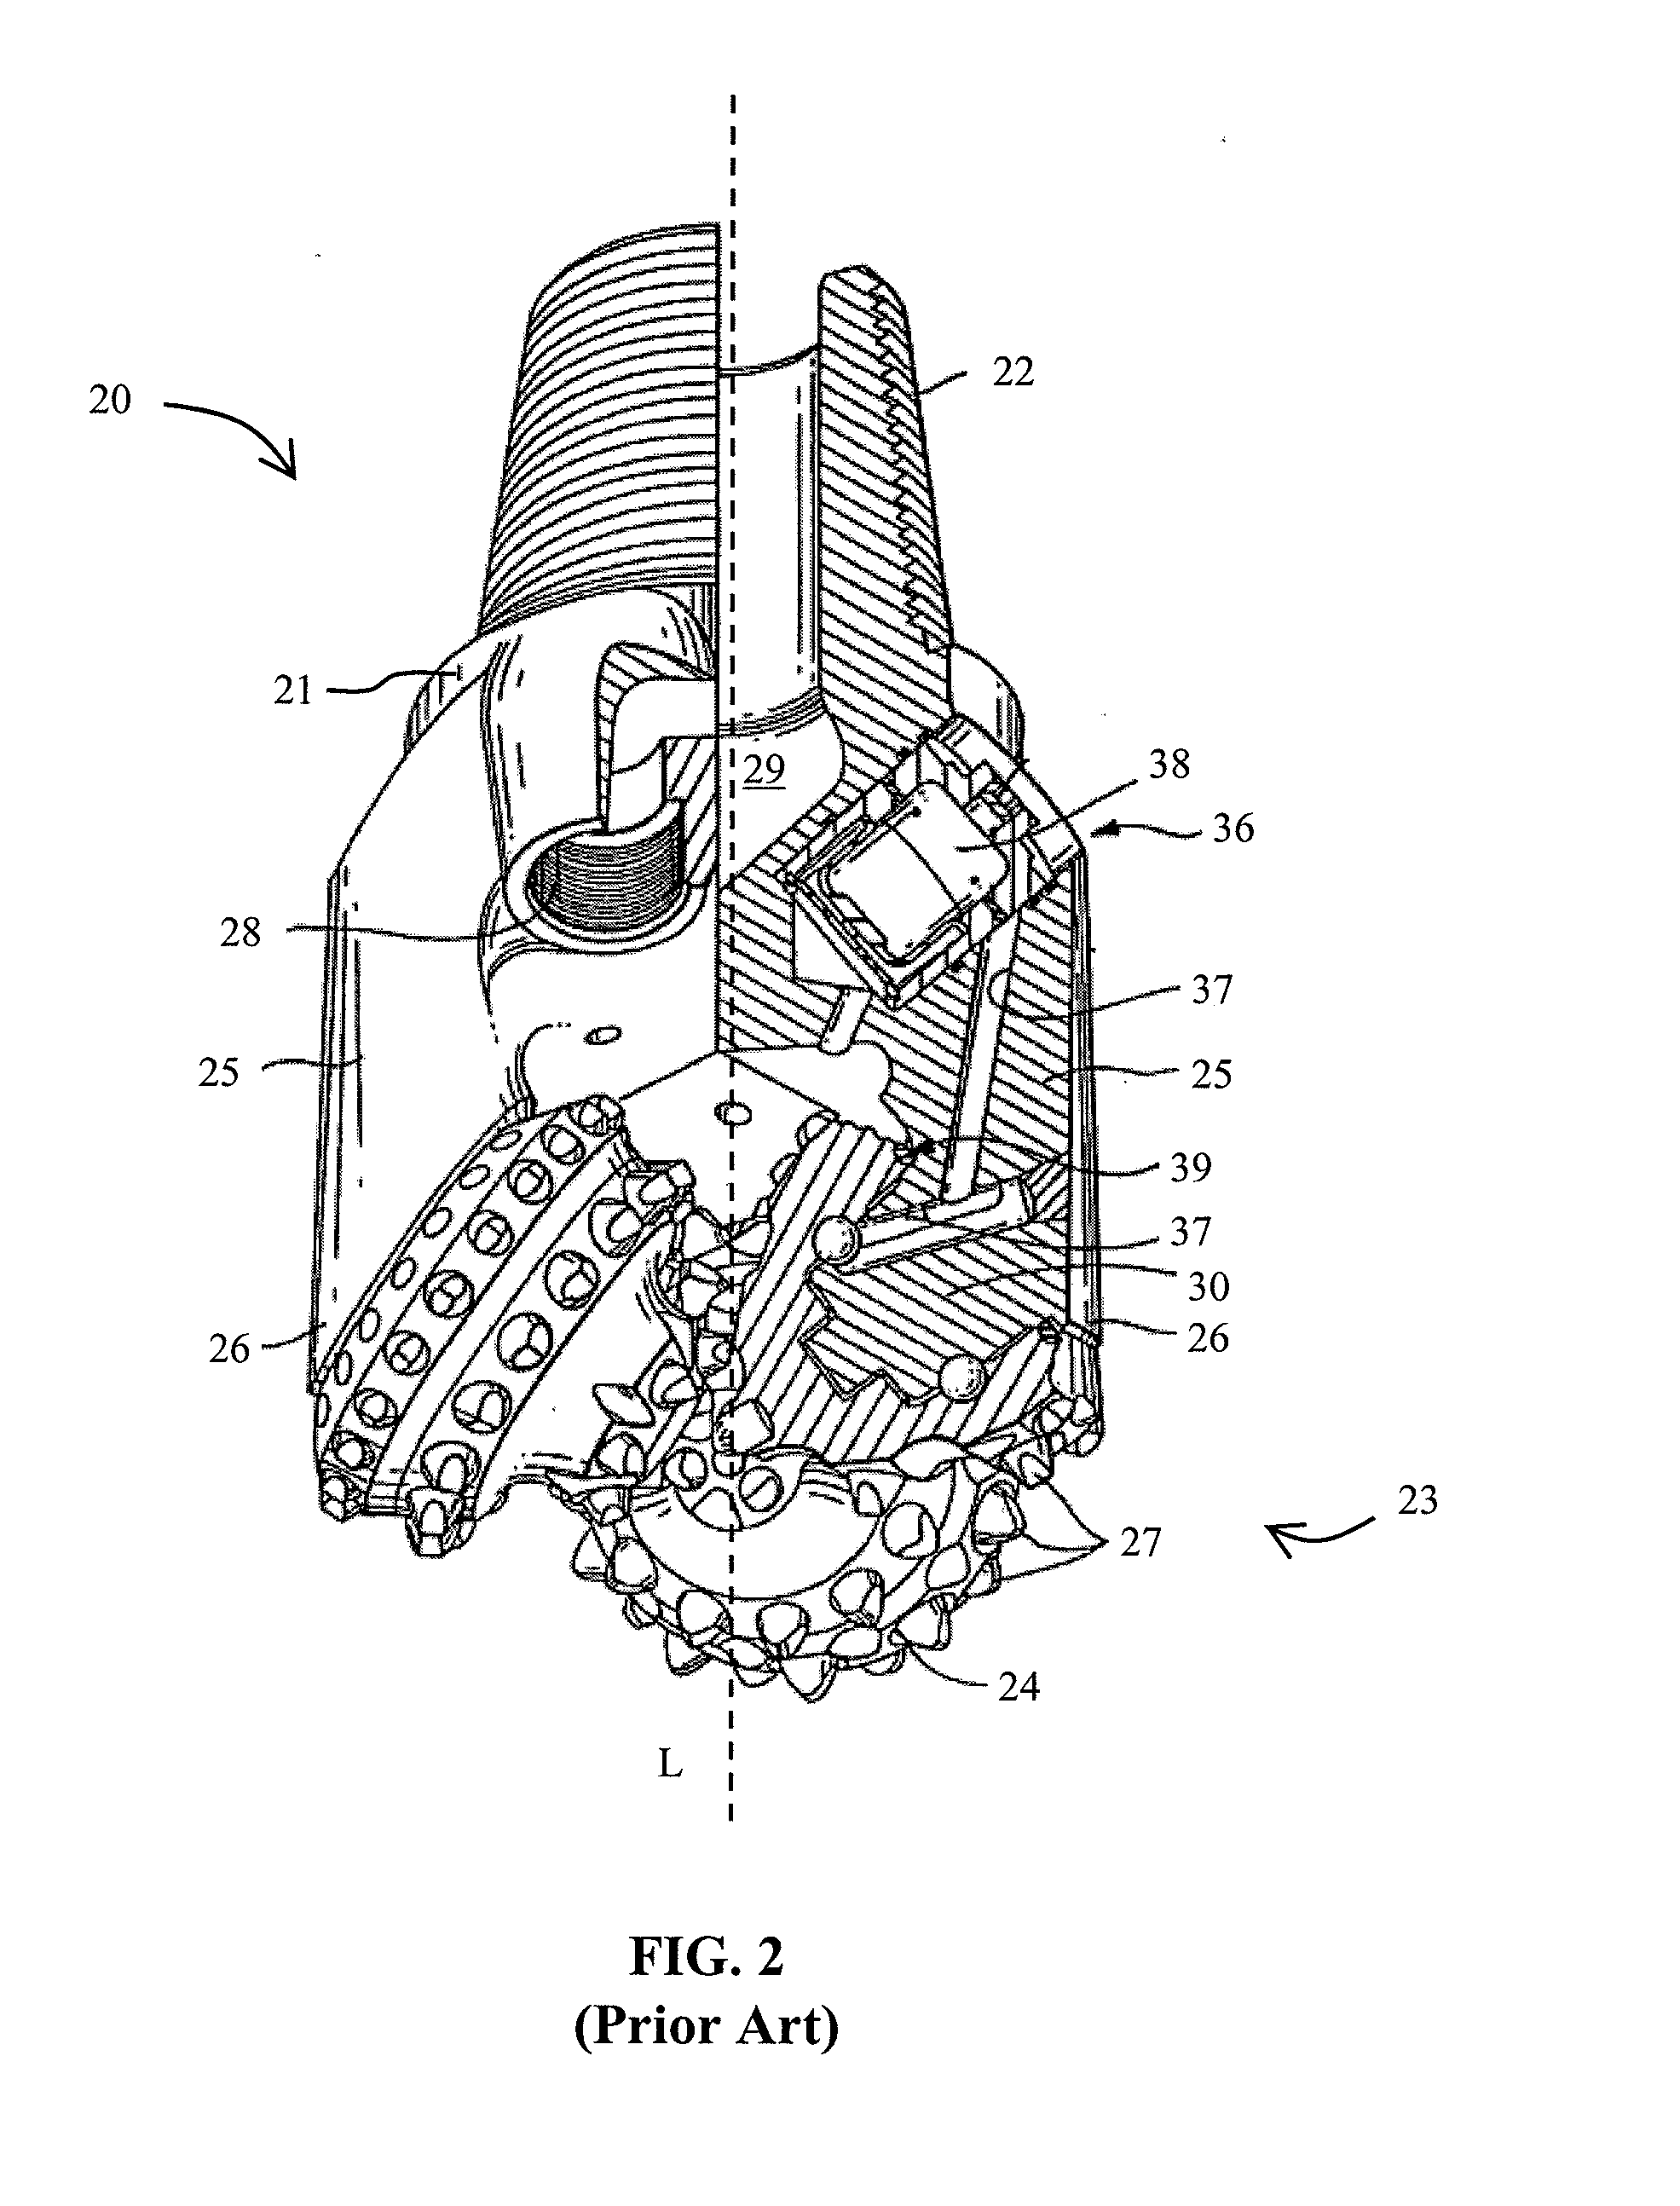 High-shear roller cone and pdc hybrid bit